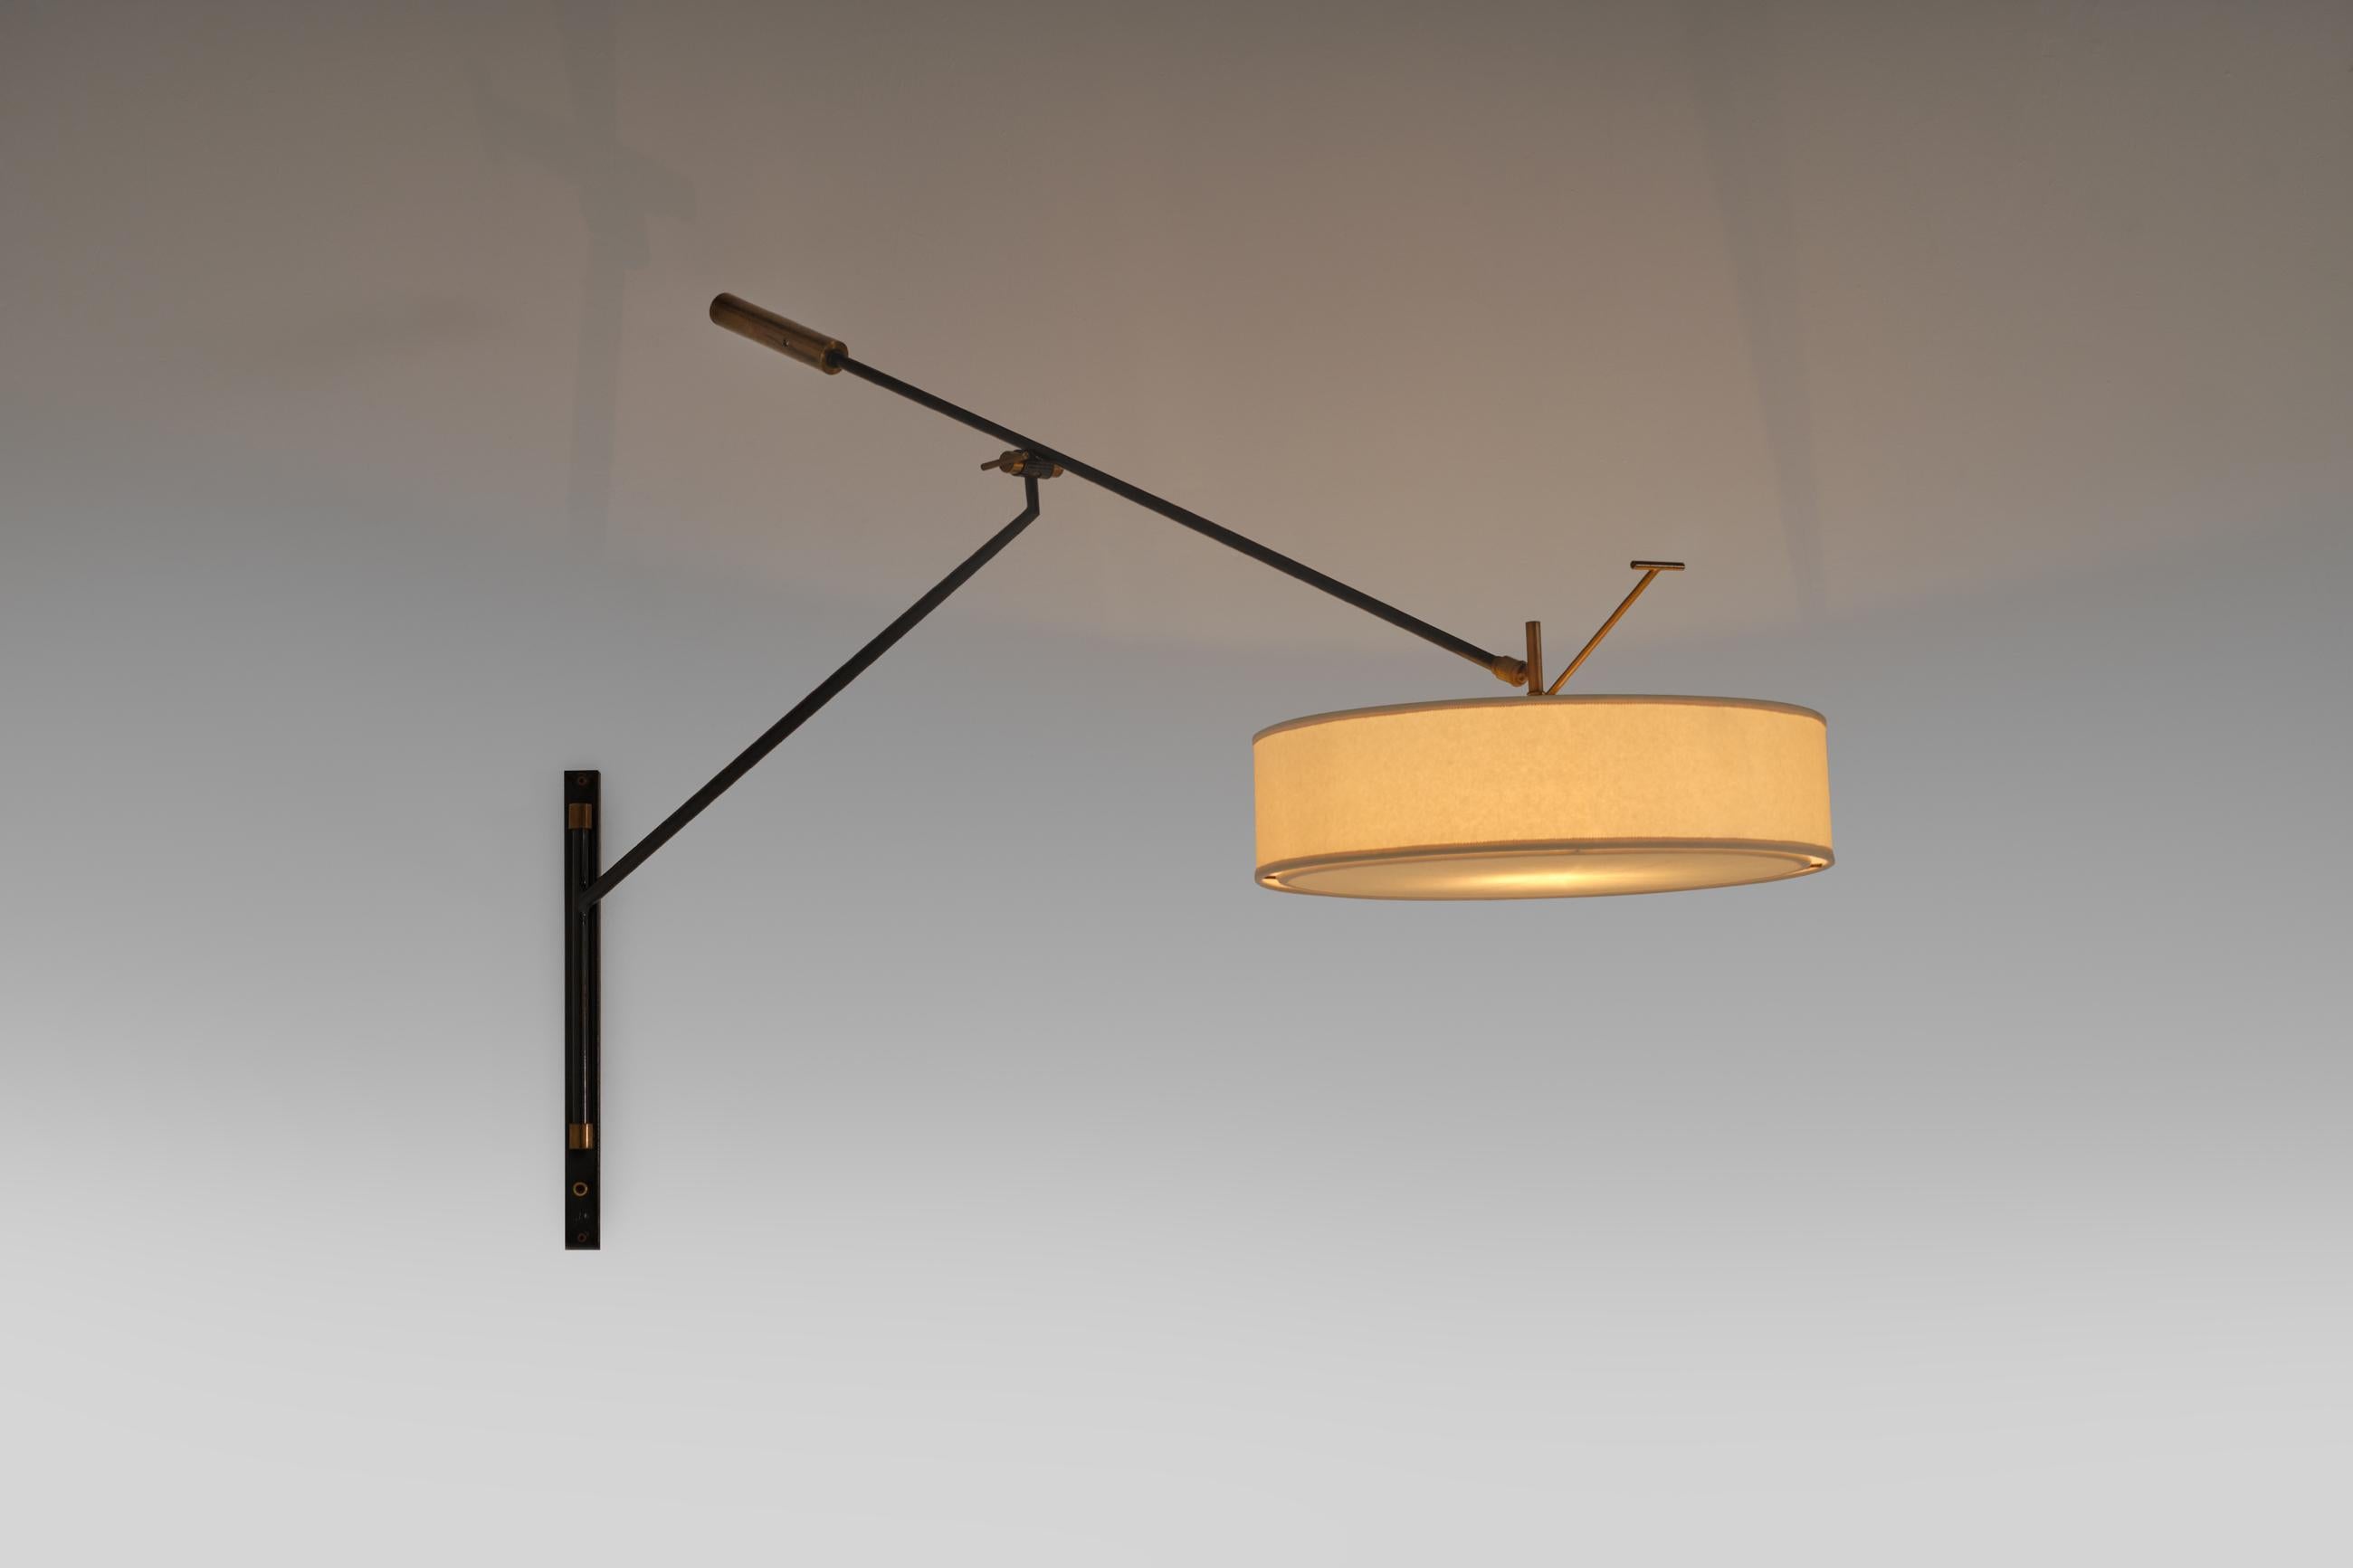 Stunning adjustable wall lamp by Arlus, France 1950s. The frame is constructed out of an anthracite lacquered tubular frame with typical hard French 50's lines, finished with nice refined brass details such as the large counter weight, the hinge